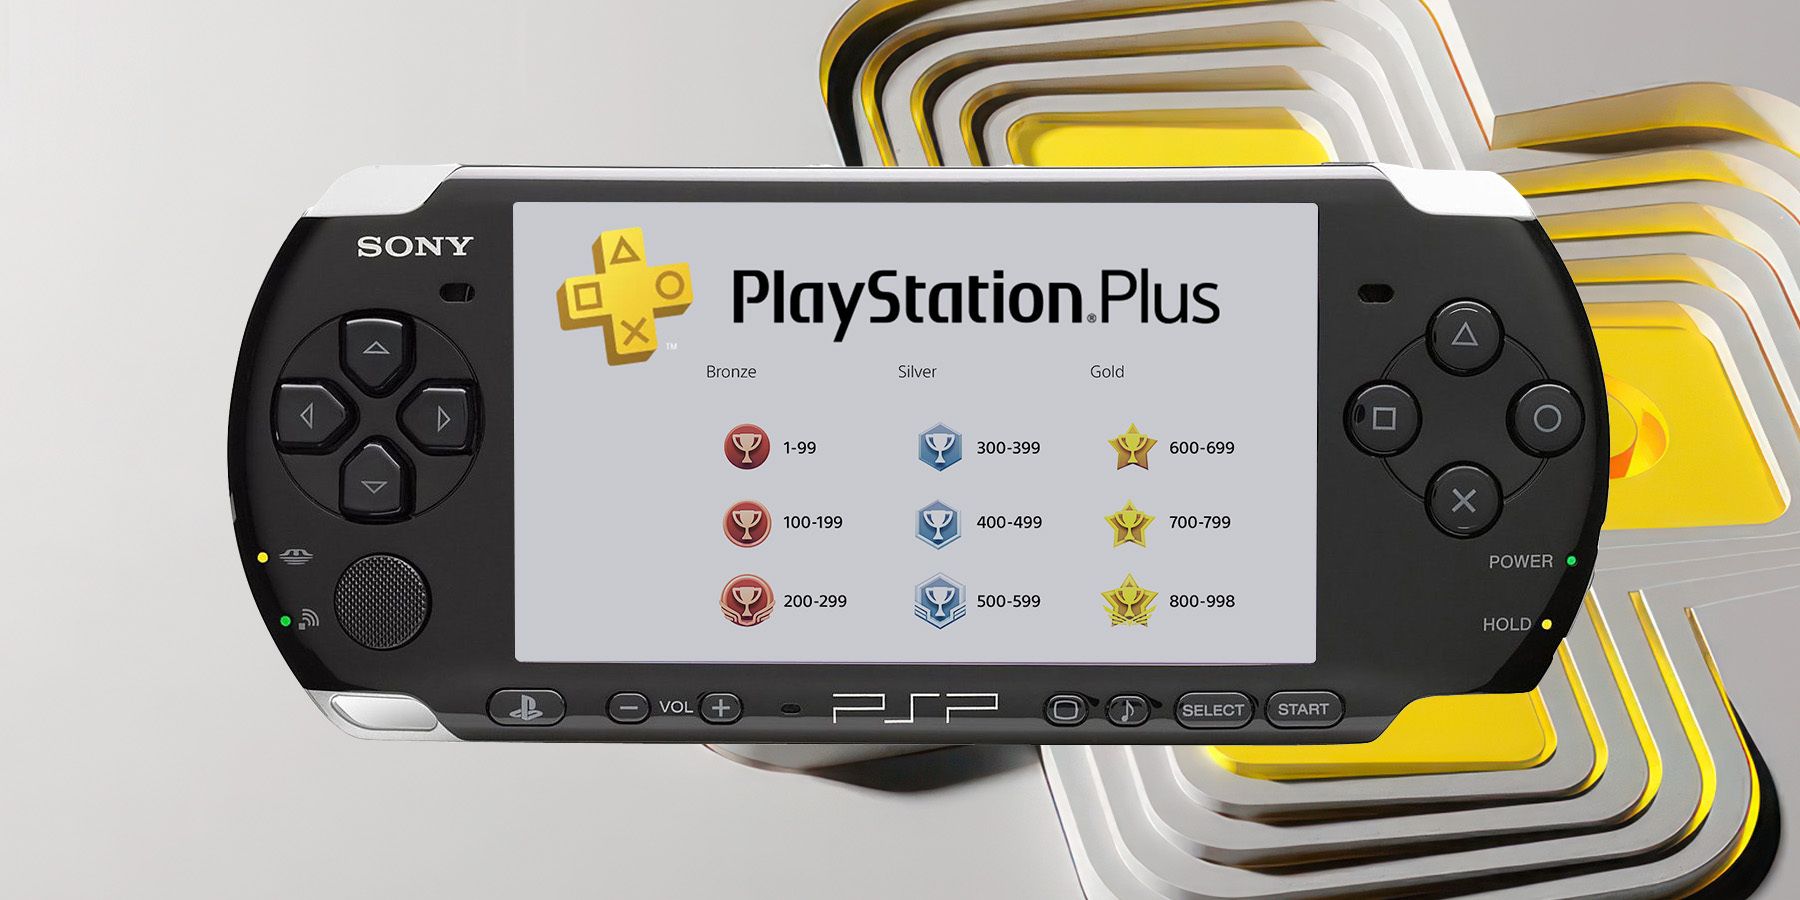 How to Choose the PSP That's Best for You